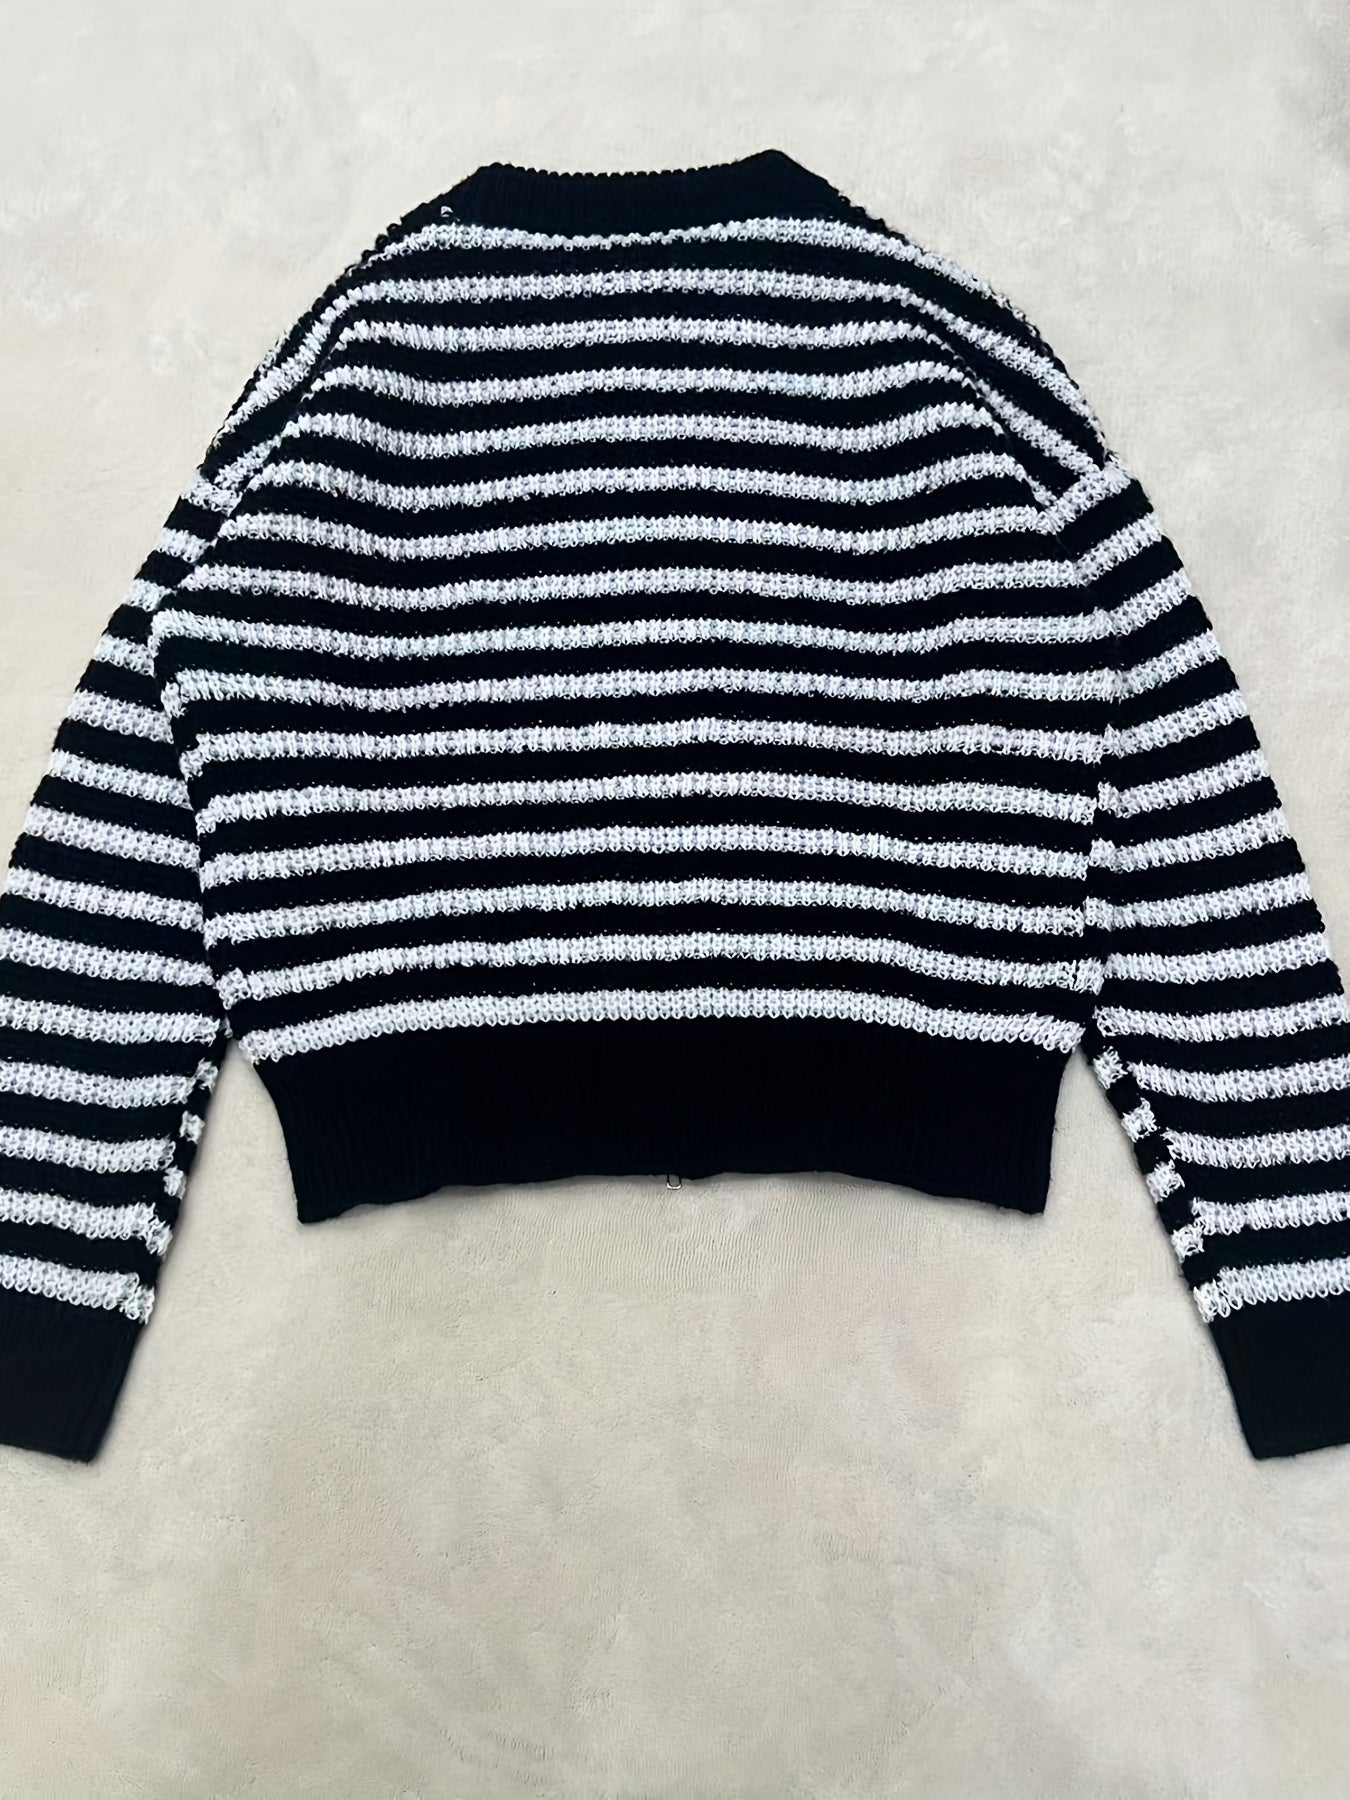 Antmvs Striped Crew Neck Zip Up Cardigan, Casual Long Sleeve Sweater For Spring & Fall, Women's Clothing